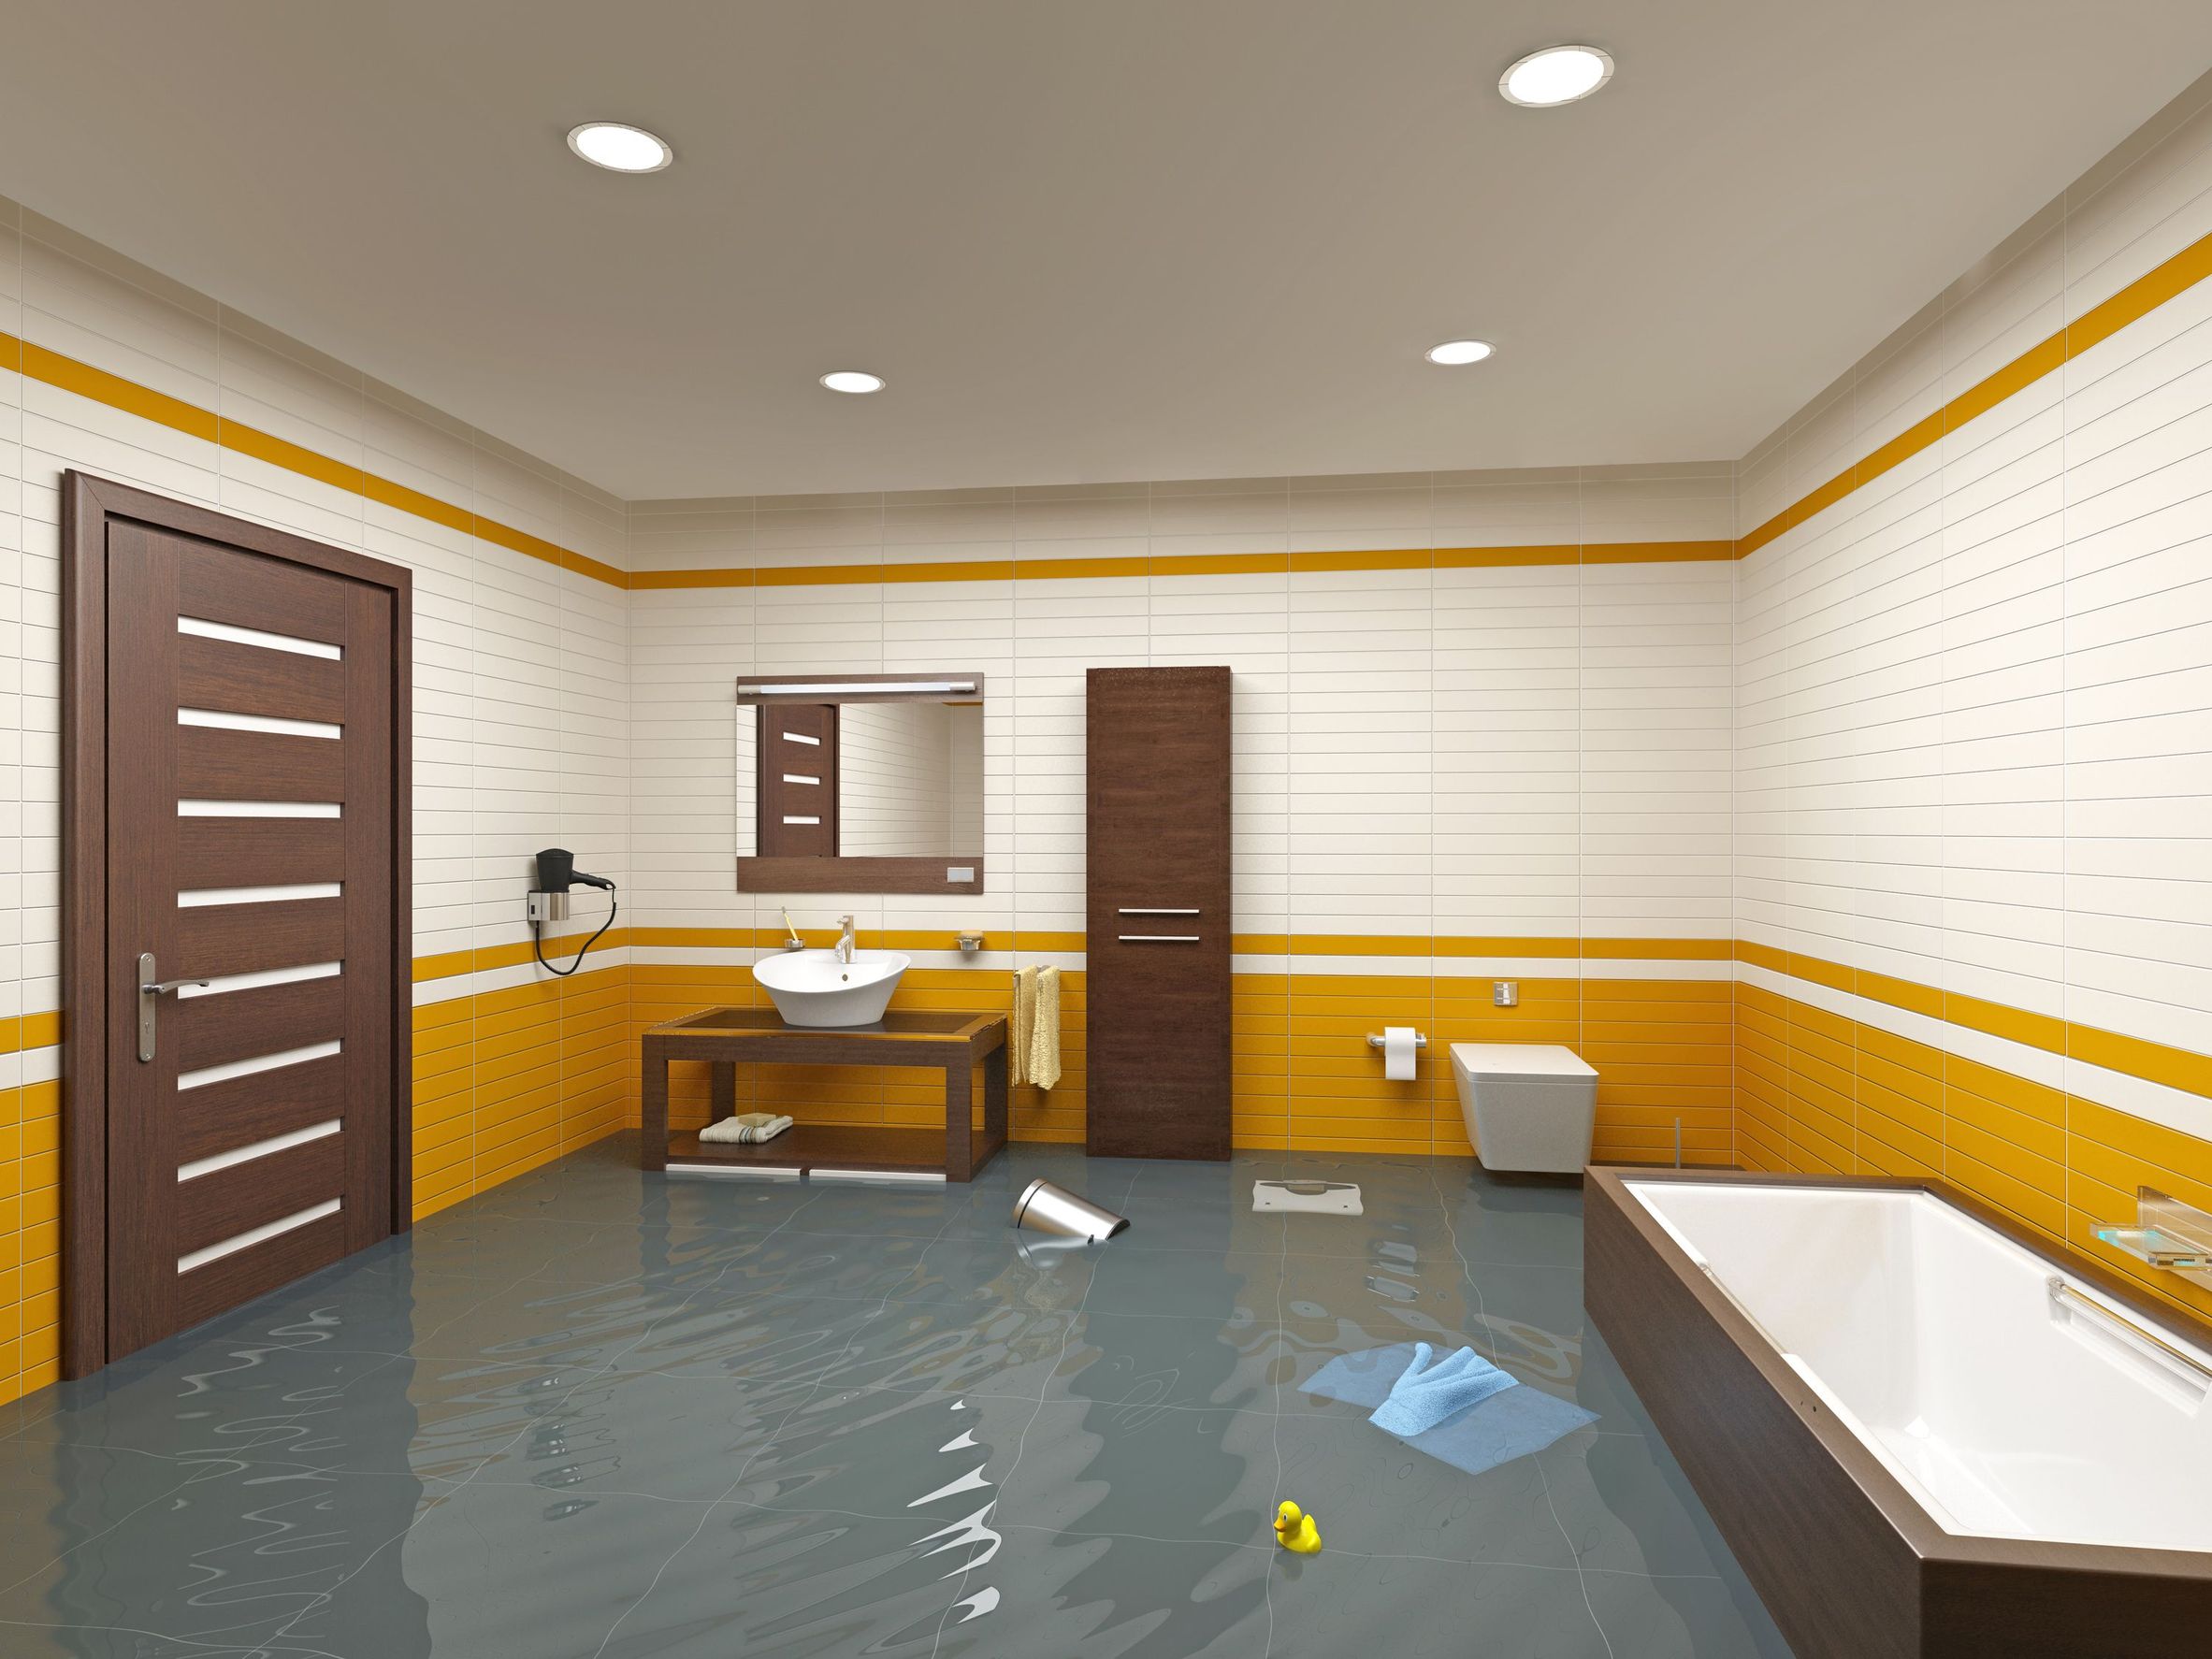 Steps of Emergency Water Damage Cleanup in Maryville, TN